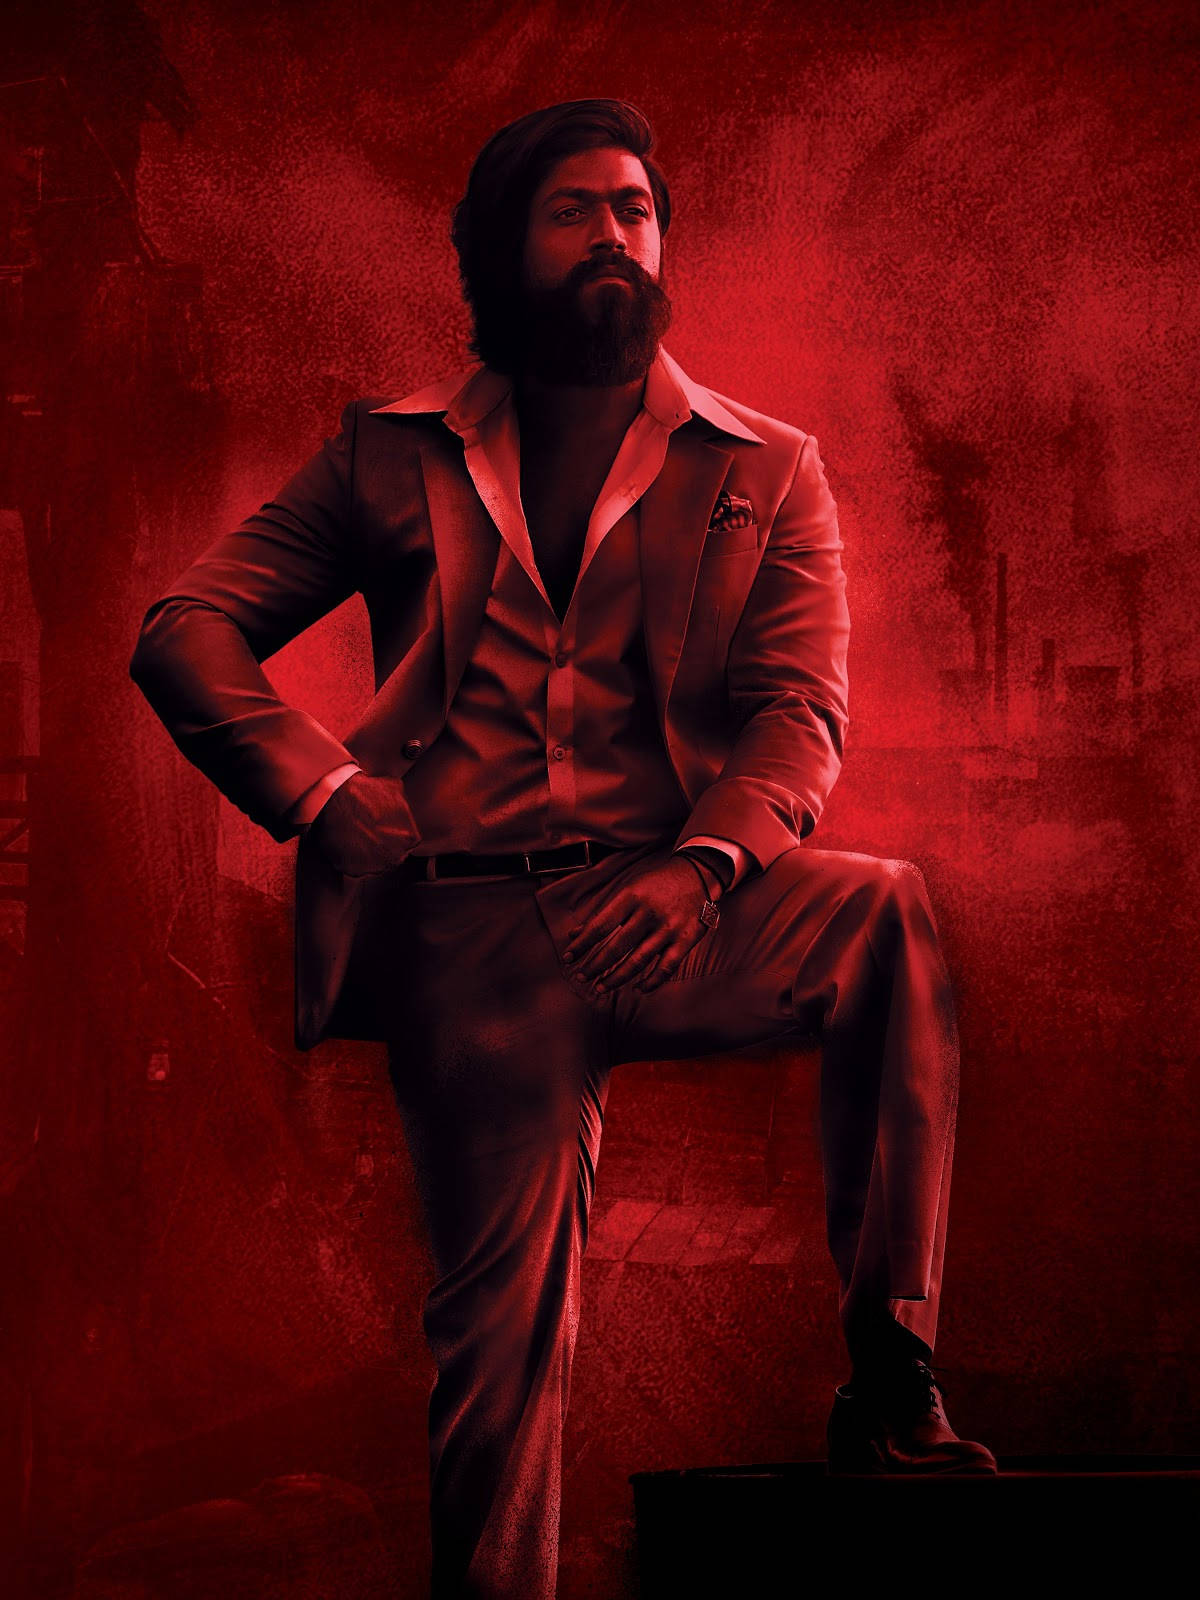 KGF2 Movie HD Stills  Images Pictures  123HDgallery